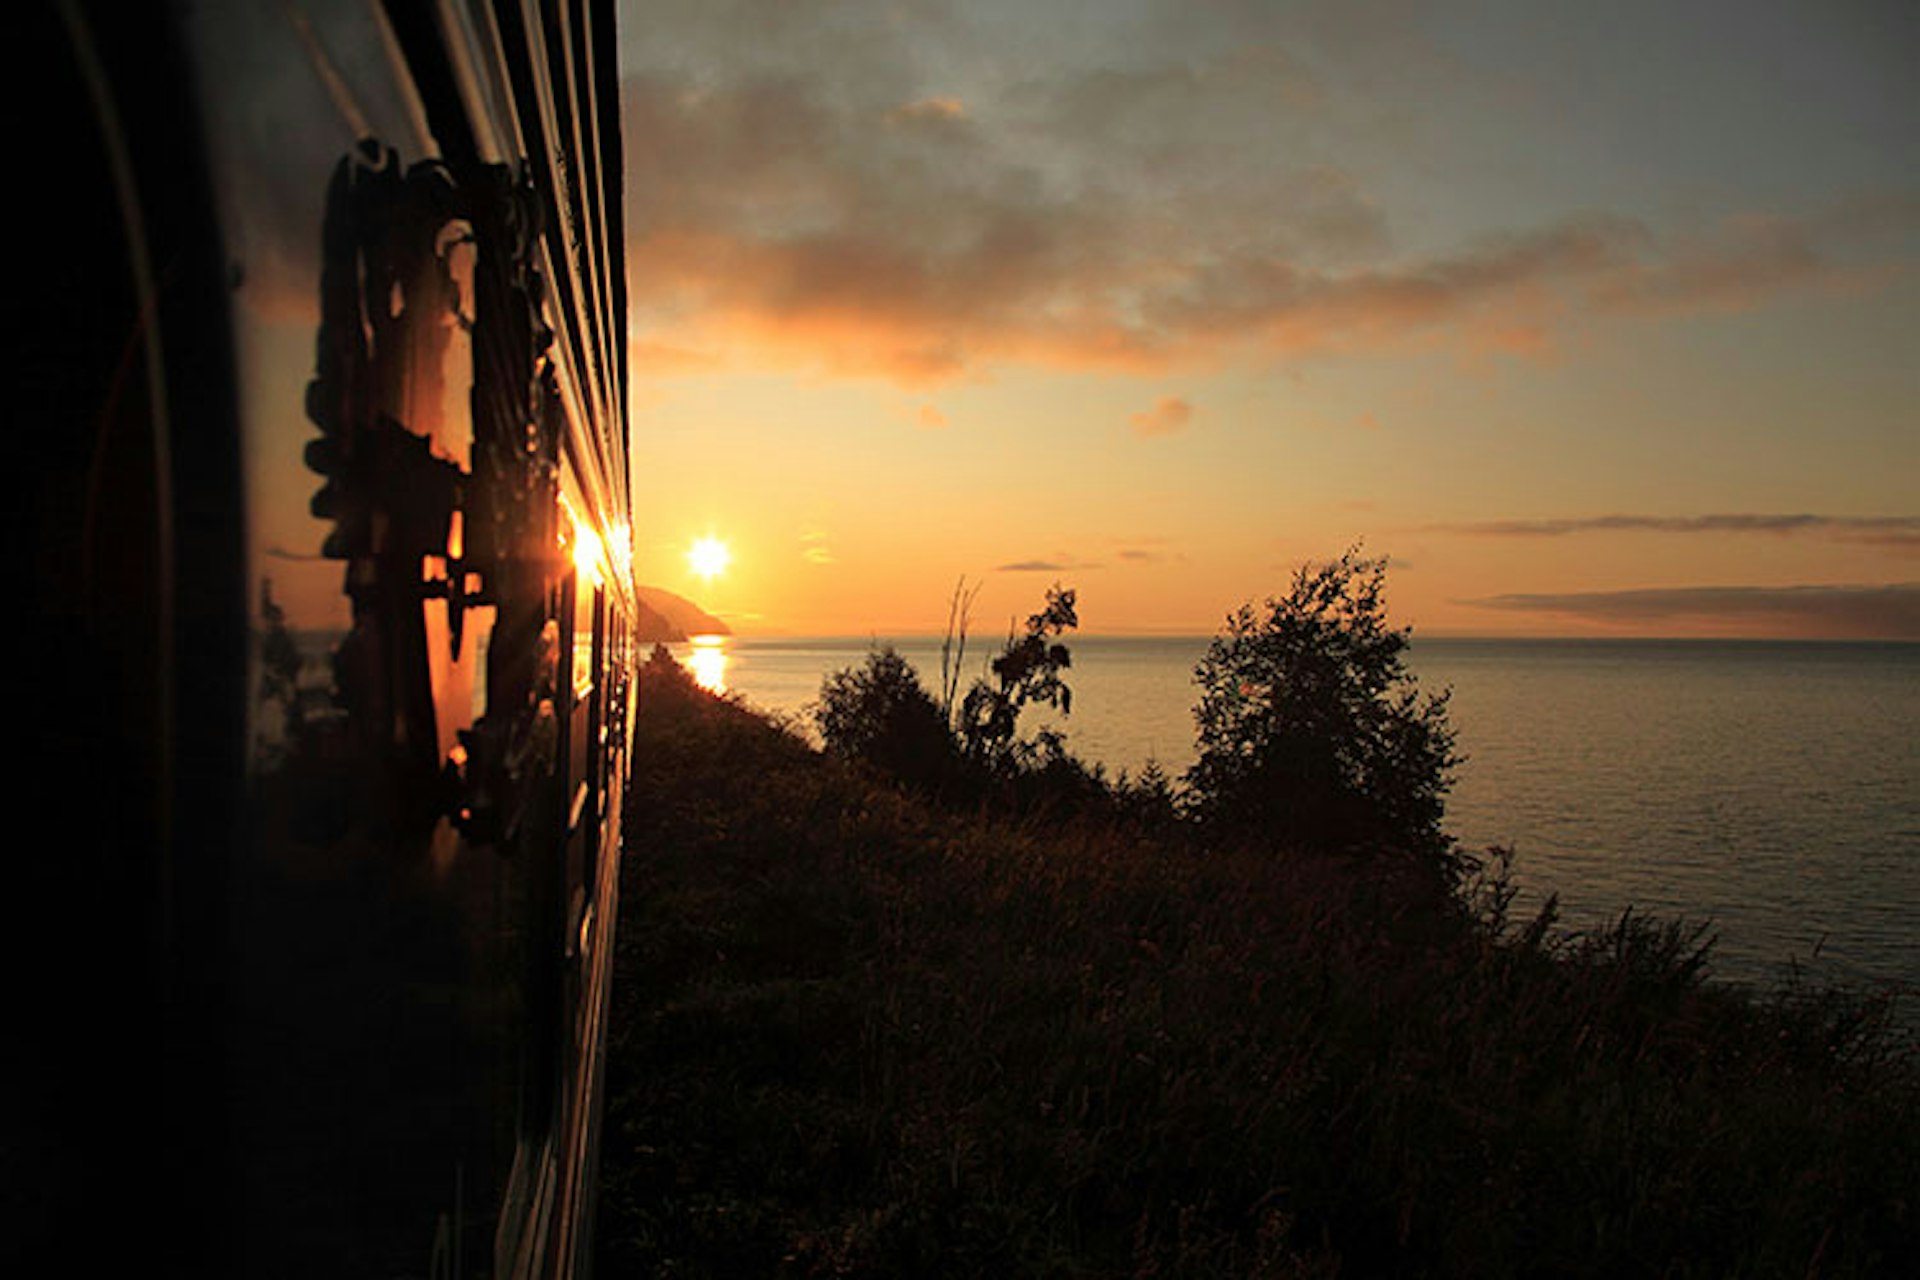 Lake Baikal at sunset seen from the railway line © Image Source / Getty Images